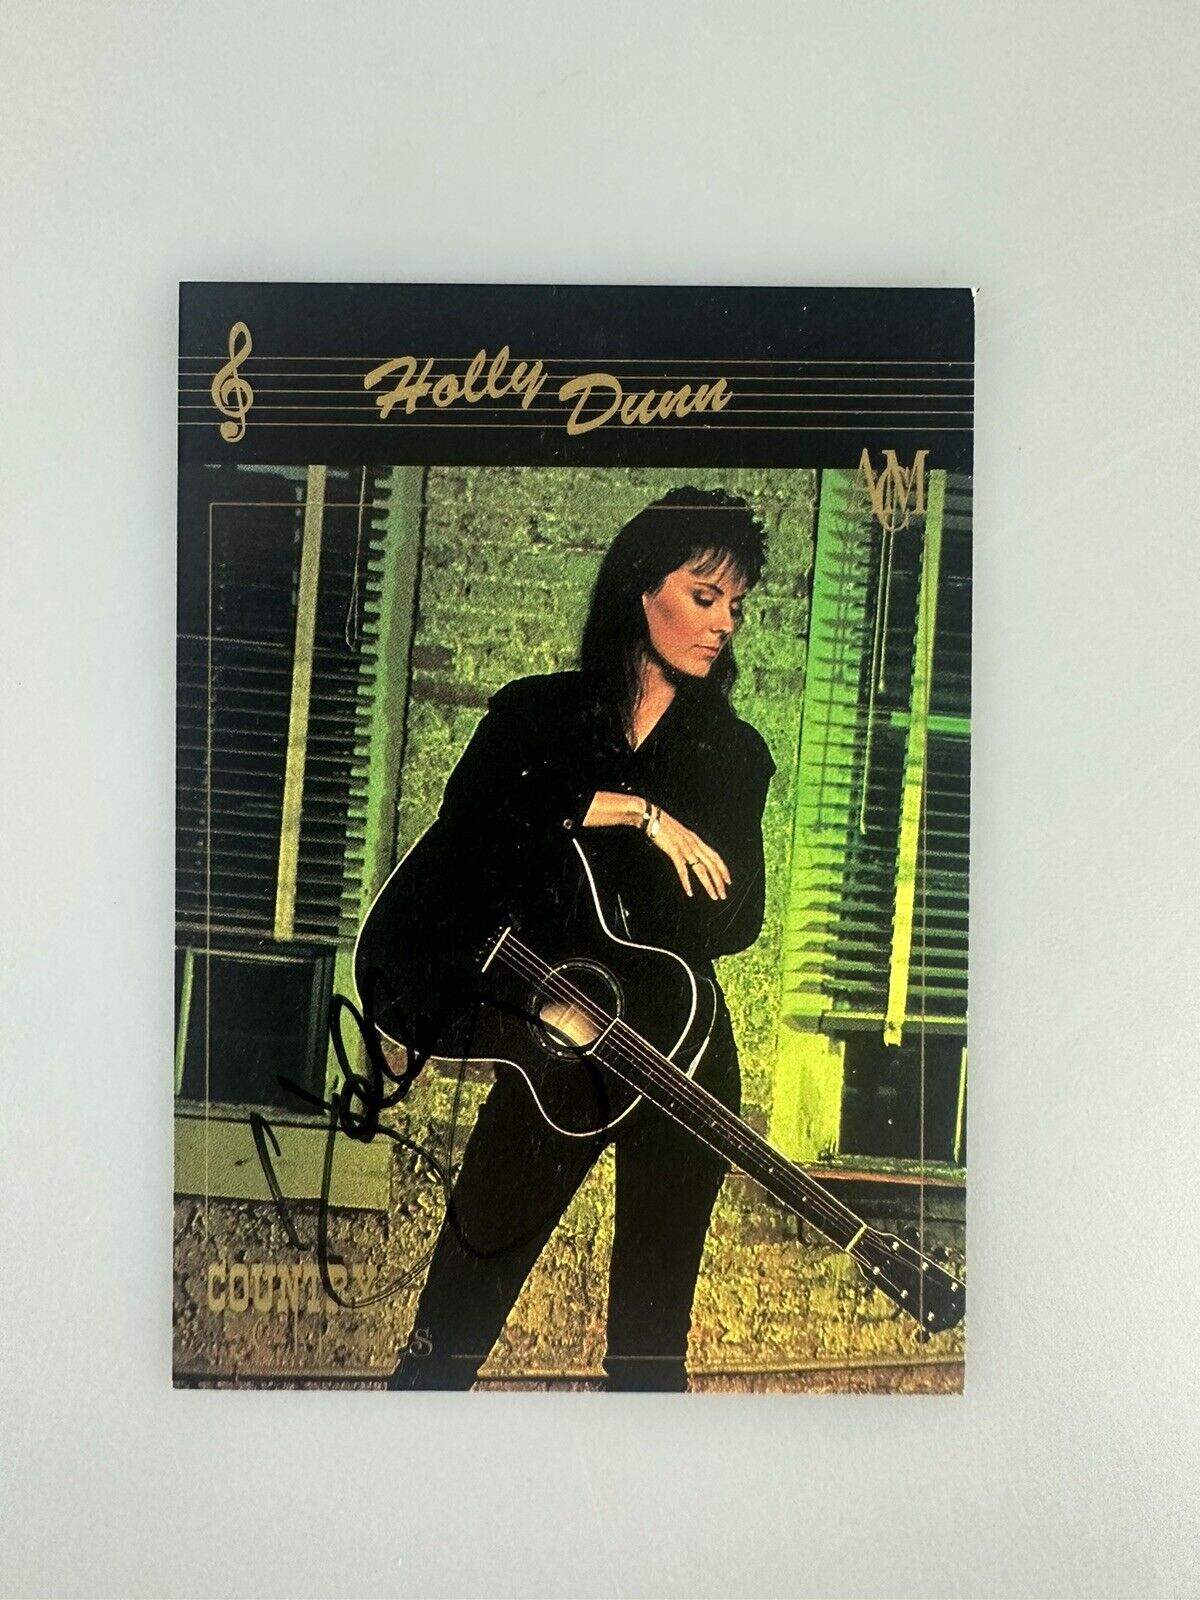 1992 Country Classics #51 Holly Dunn Auto Signed Autograph